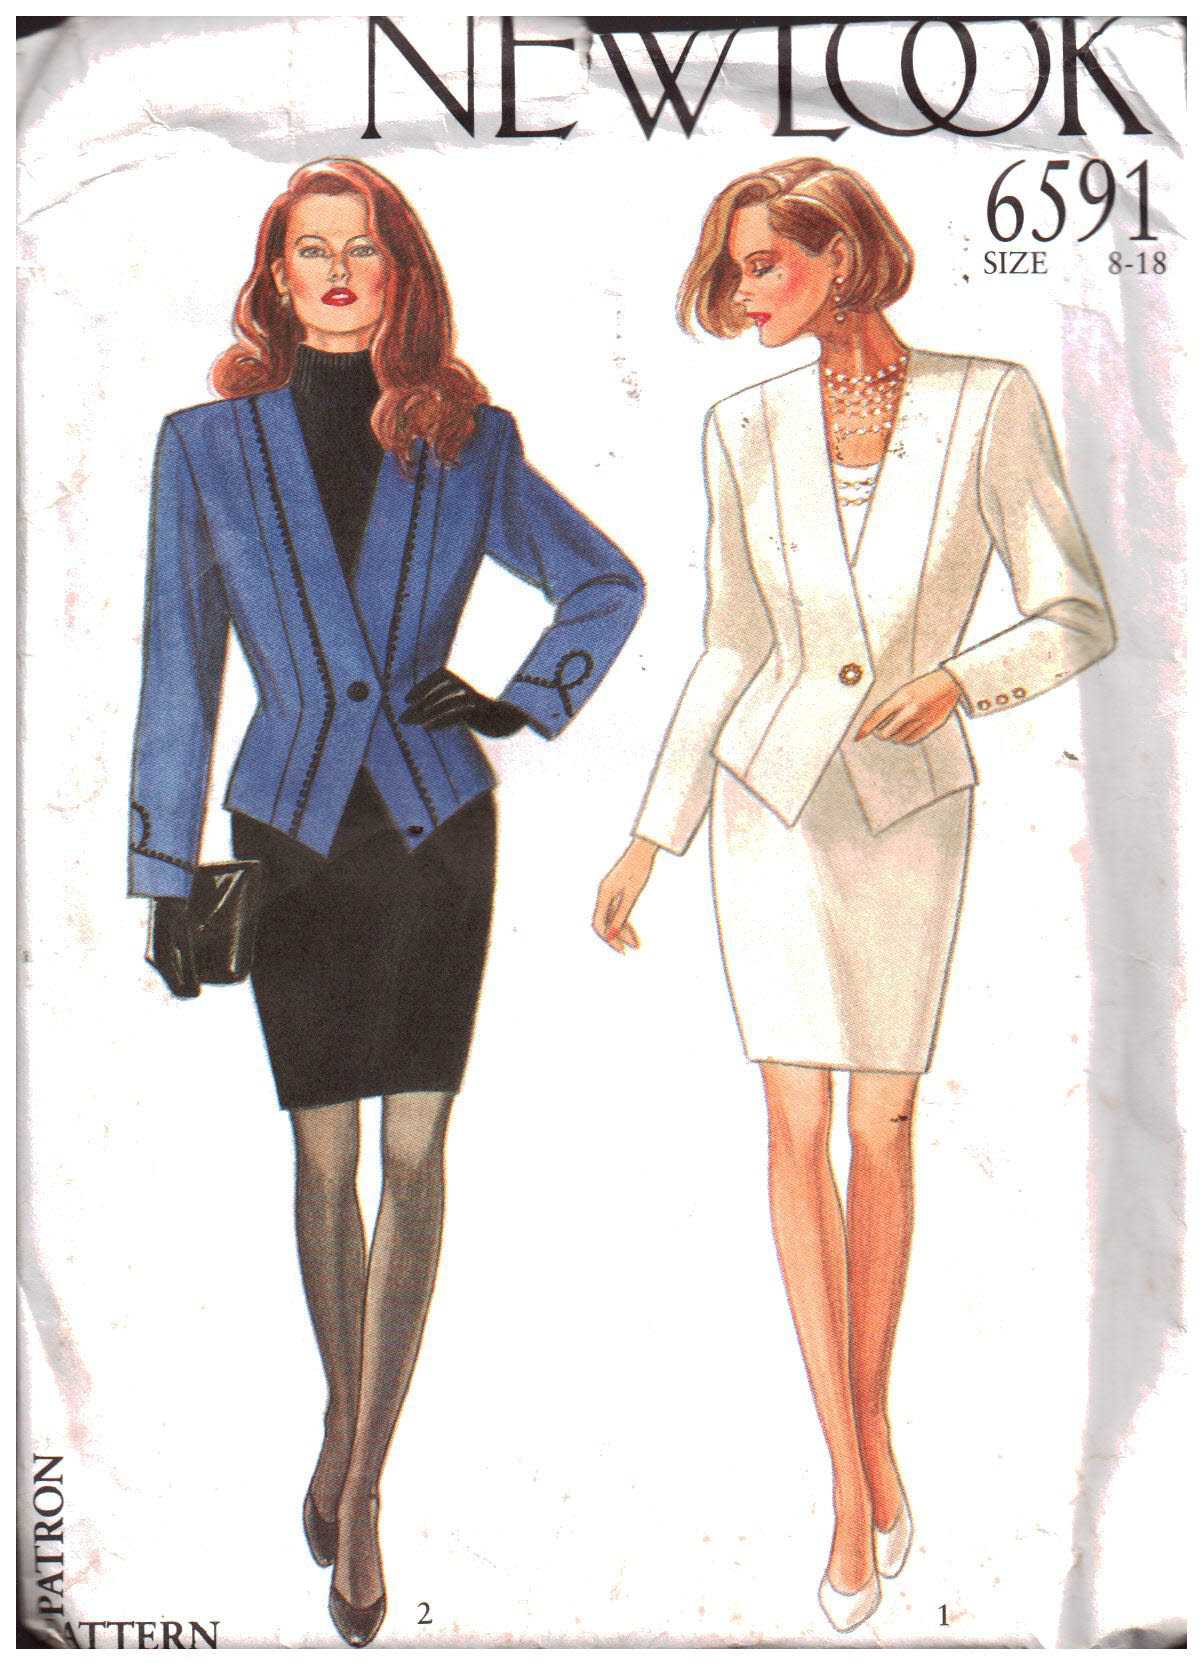 New Look 6591 Top, Skirt Size: 8-18 Uncut Sewing Pattern